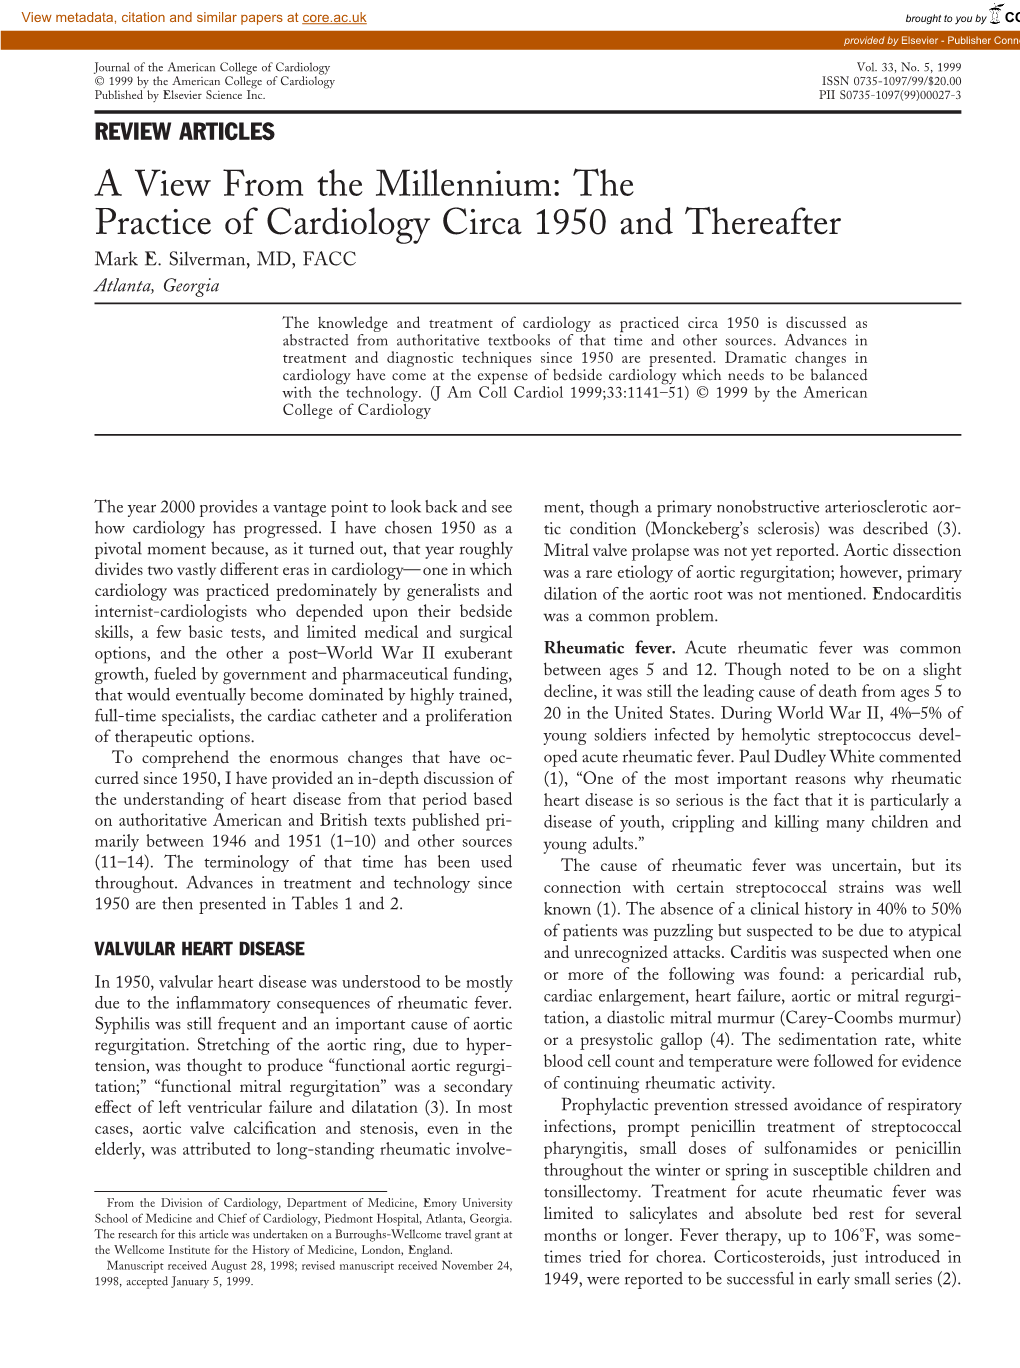 The Practice of Cardiology Circa 1950 and Thereafter Mark E